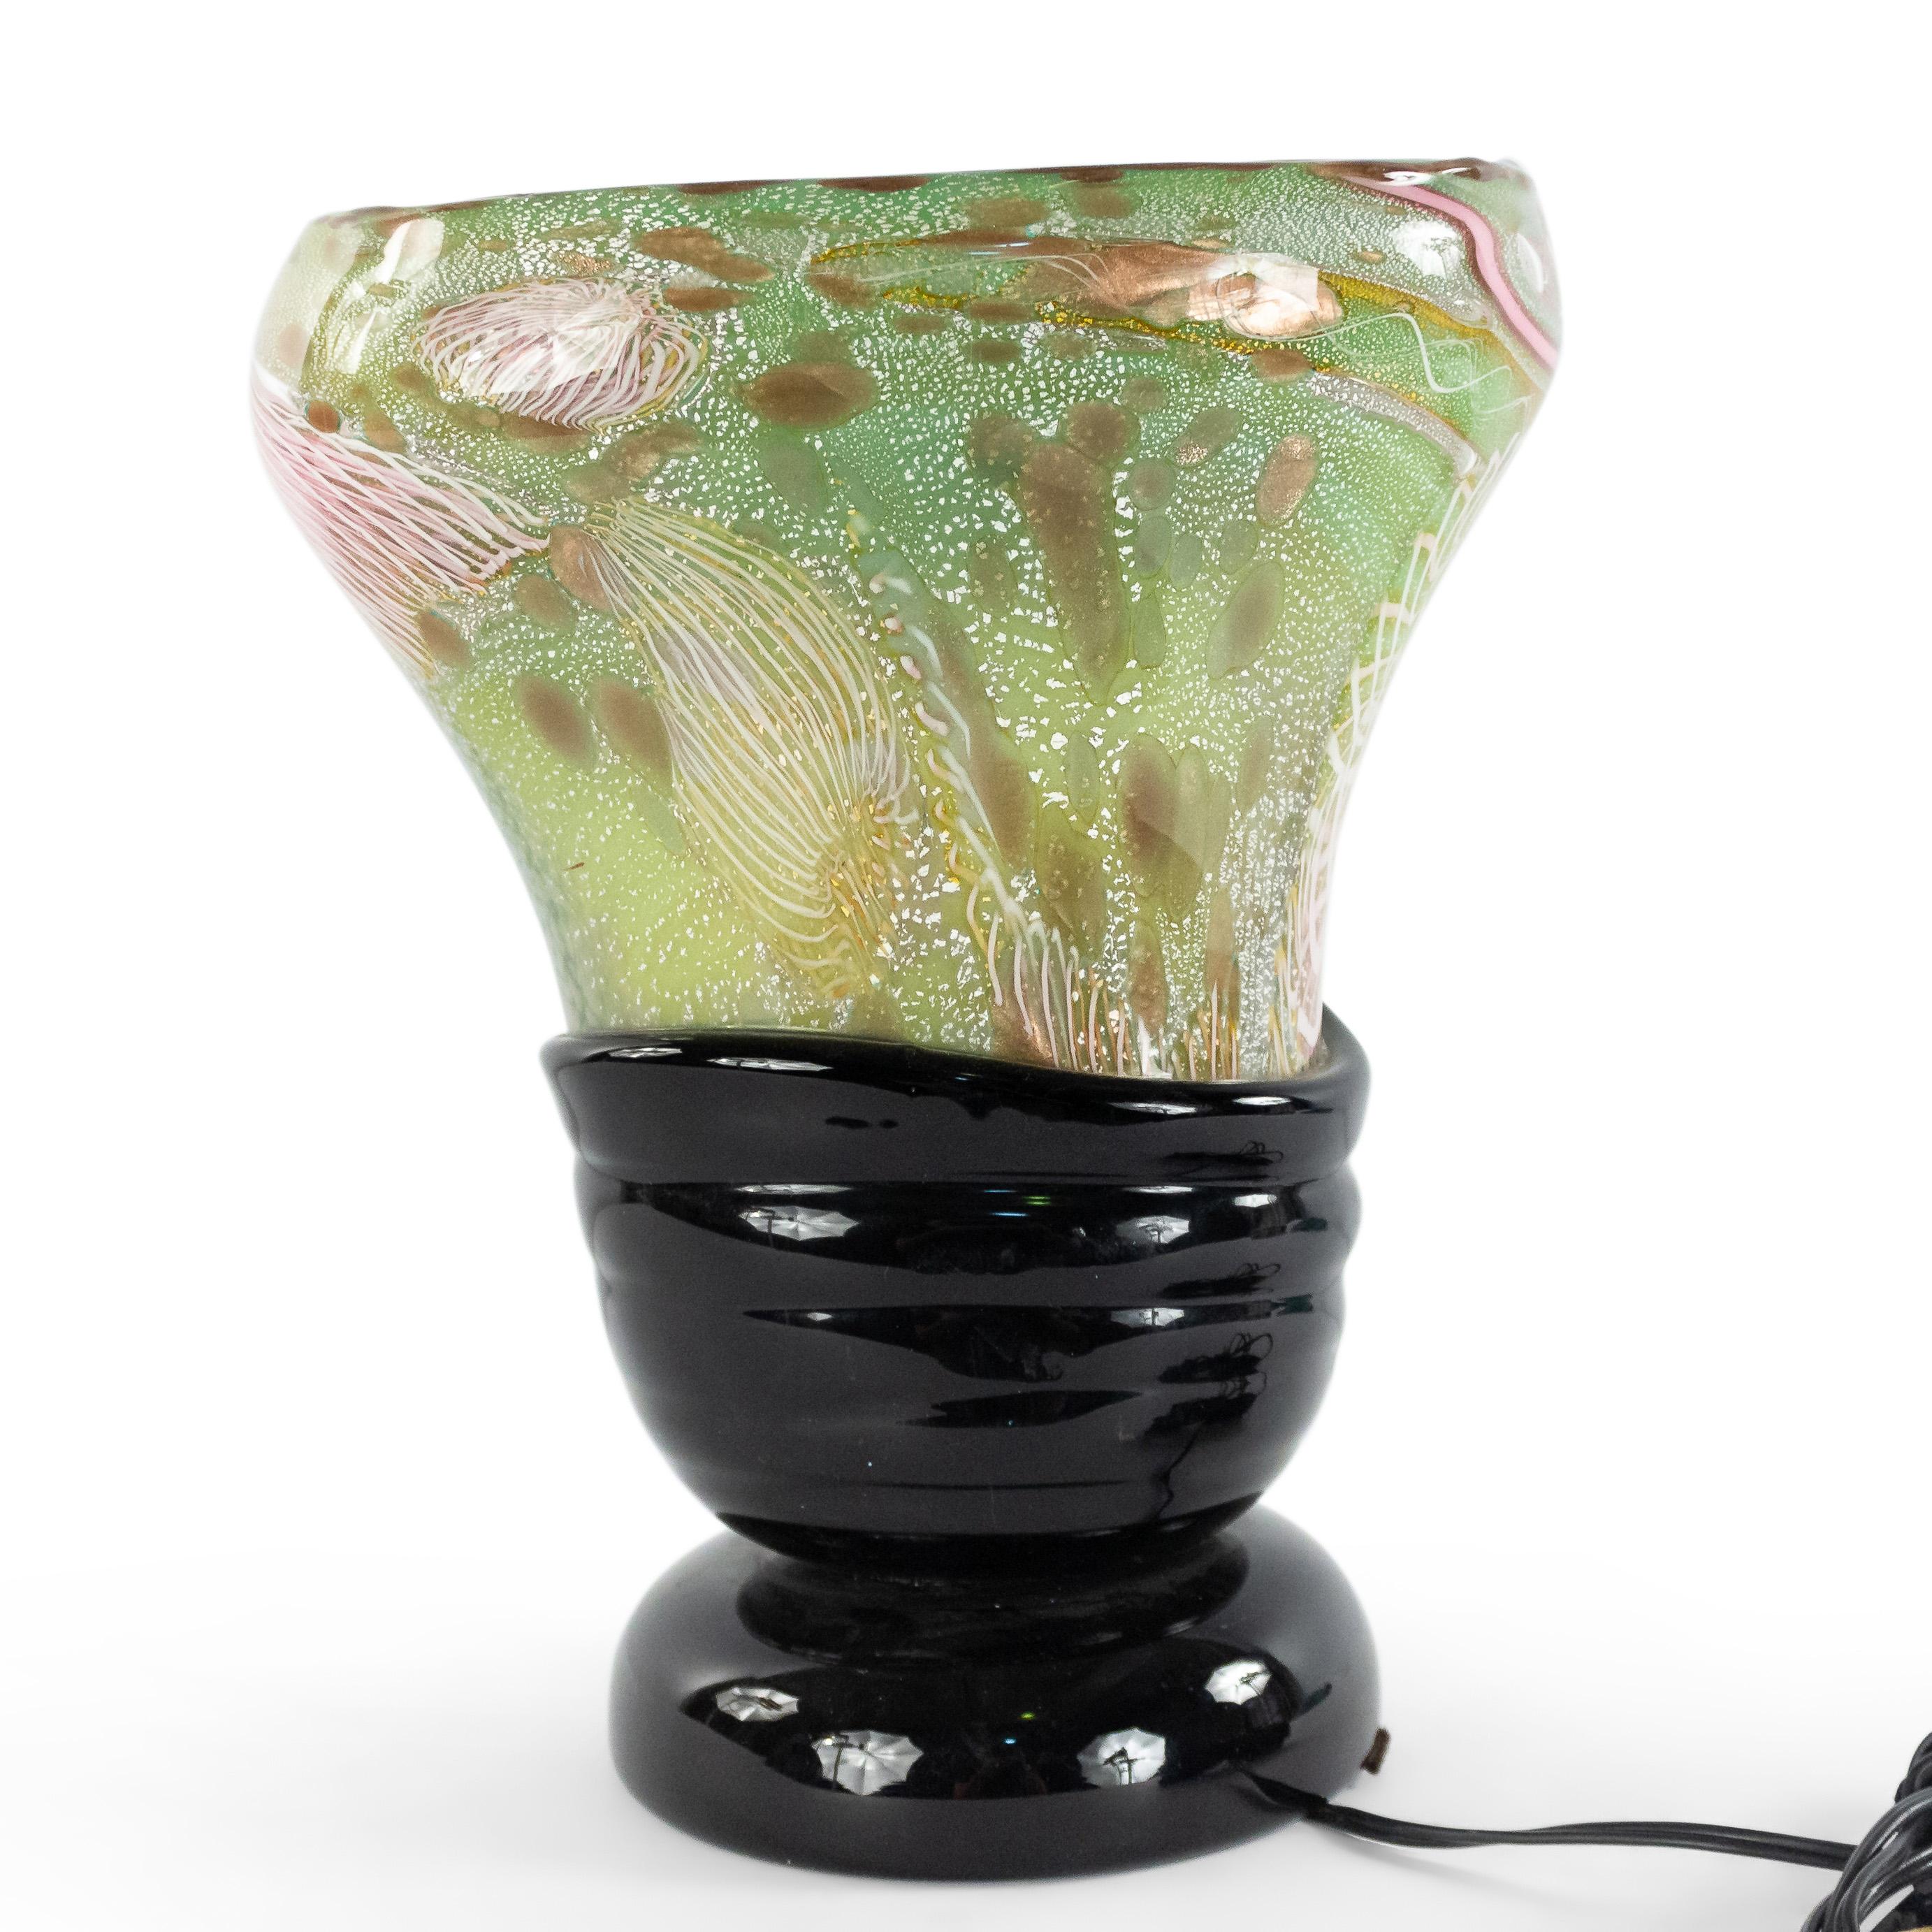 Italian 1960s Venetian Murano glass oval shaped table lamp of vase form with green, pink, and white freeform design on a round applied black glass base. (att: Nichetto).